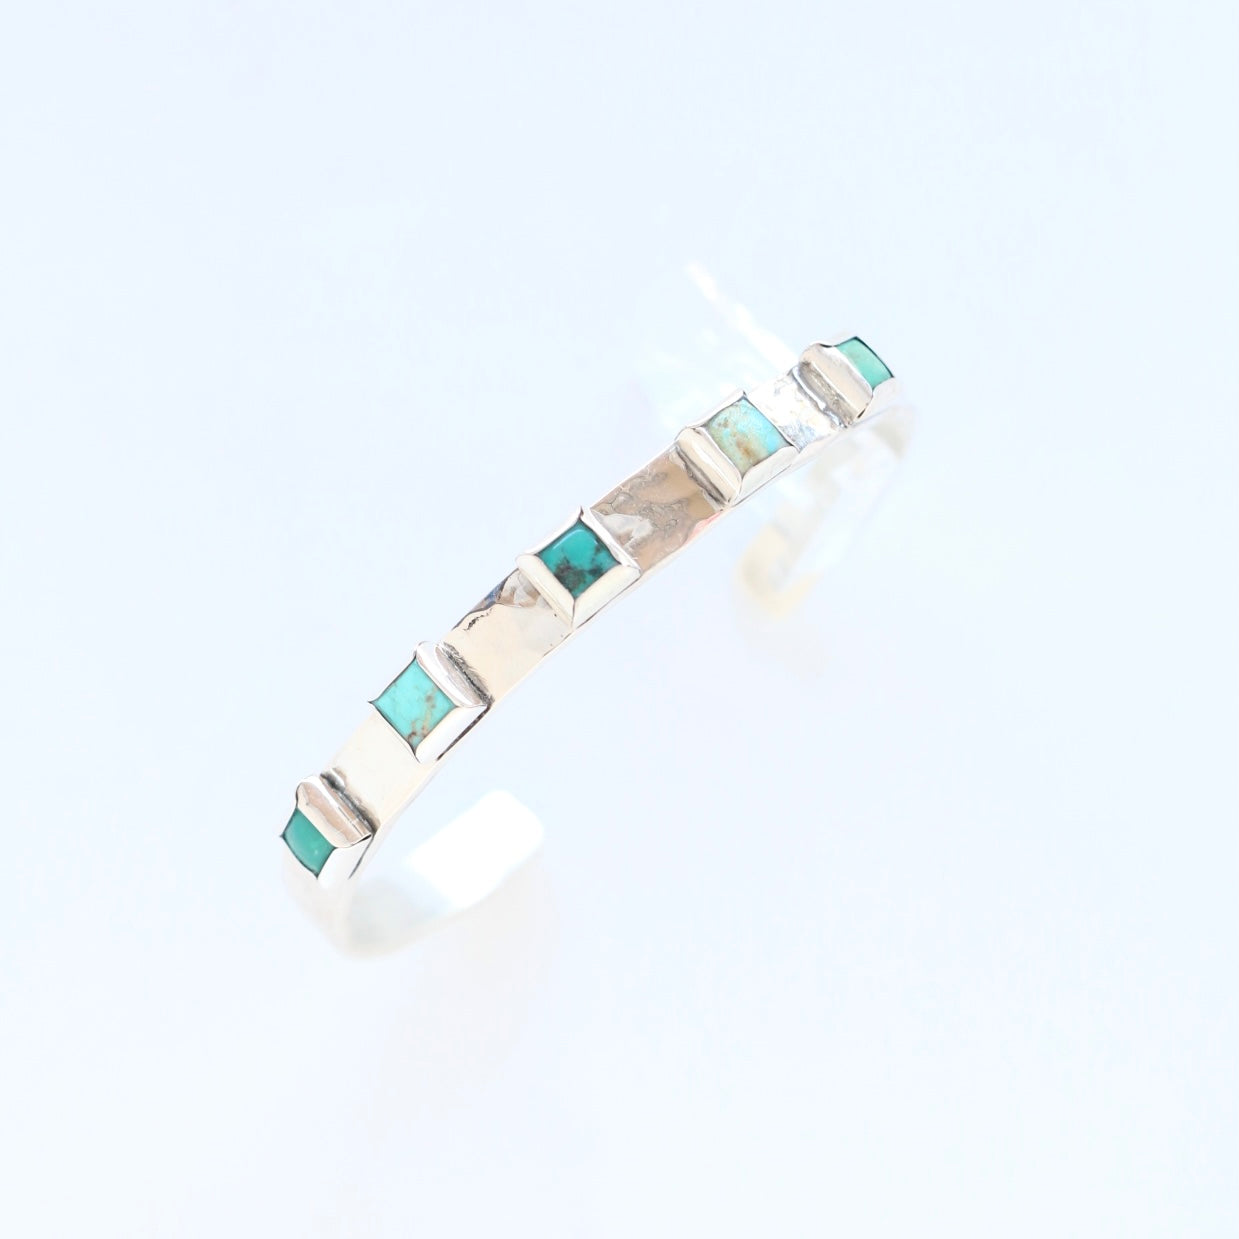 6mm Hammered Sterling Cuff with 5 Square Turquoise Cuffs Richard Schmidt   